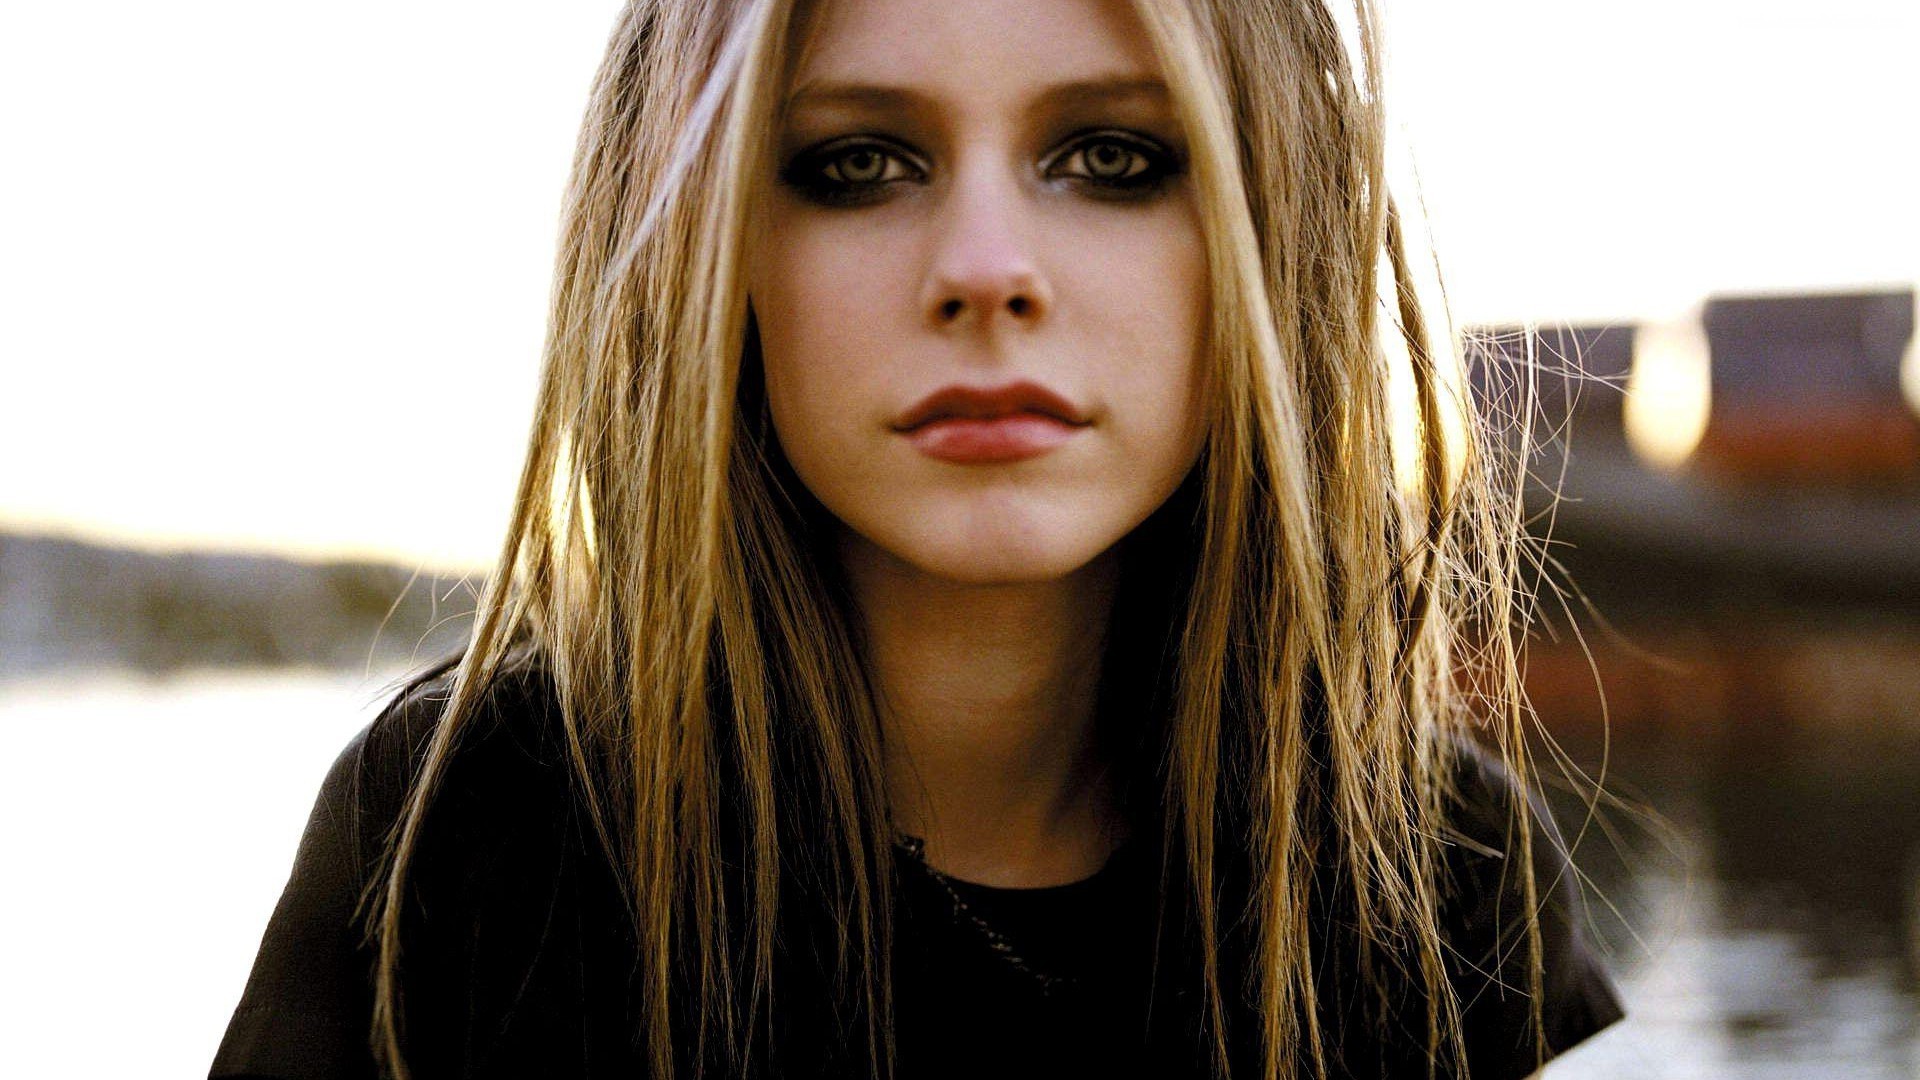 1920x1080 12 Hot Avril Lavigne Wallpapers - HD Wallpapers